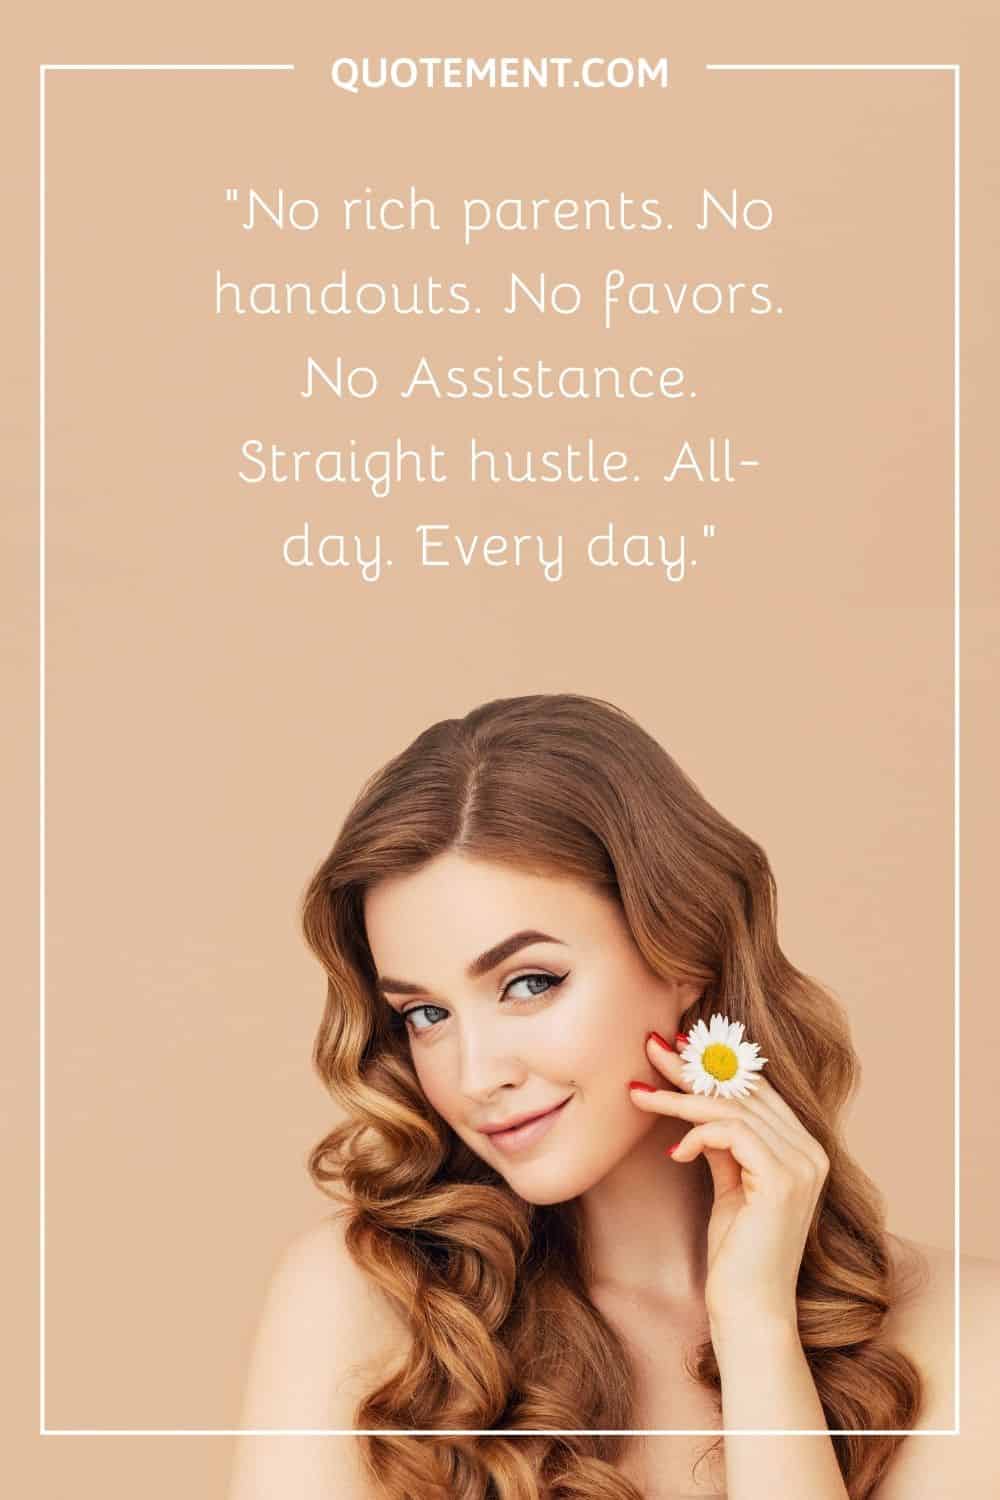 Straight hustle. All-day. Every day.